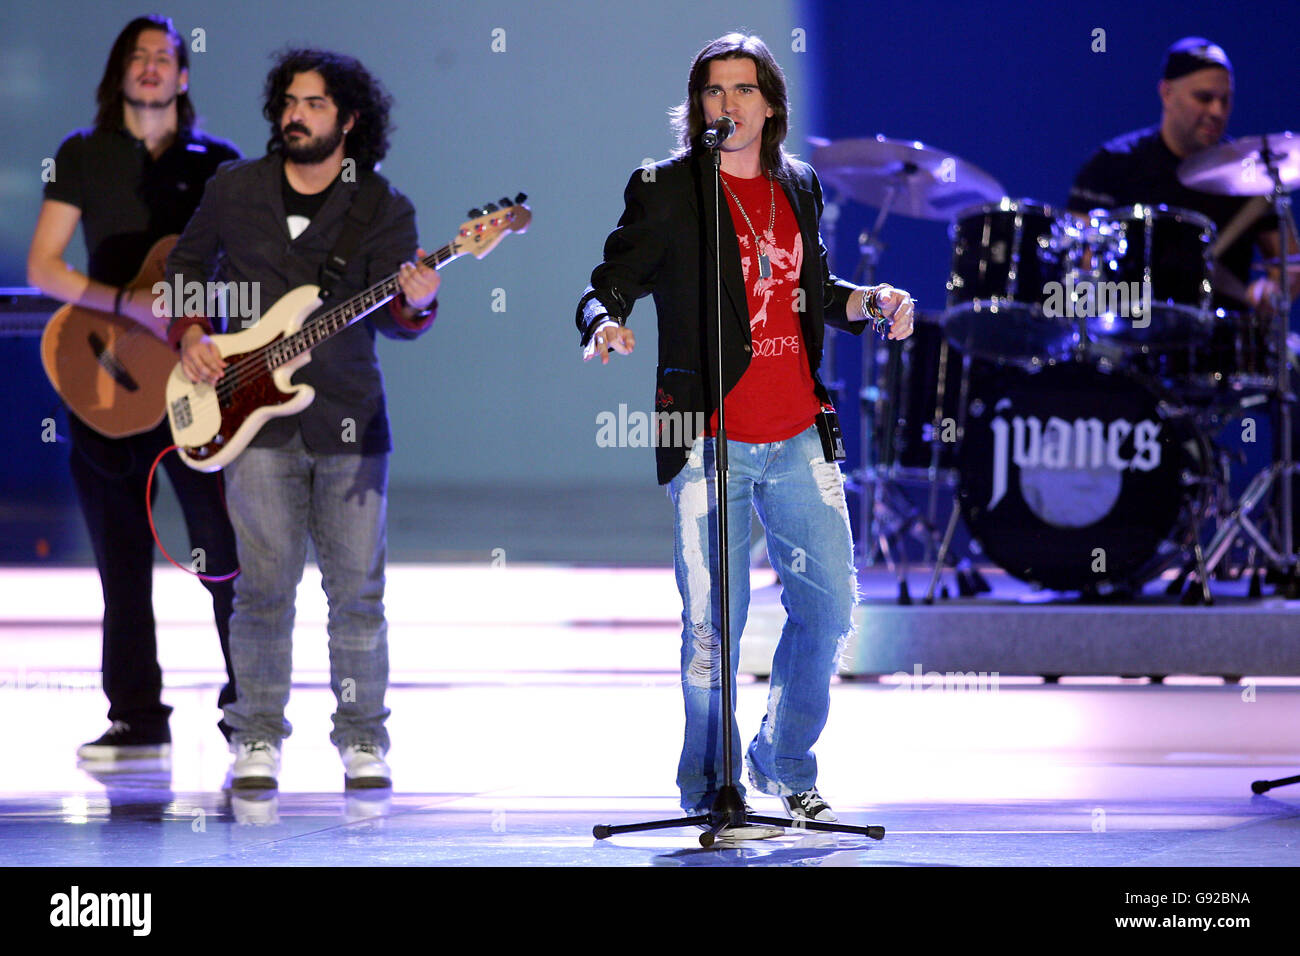 Soccer - 2006 FIFA World Cup Germany - Final Draw - Messe Leipzig. Colombian rock band Juanes perform during the 2006 FIFA World Cup final draw Stock Photo